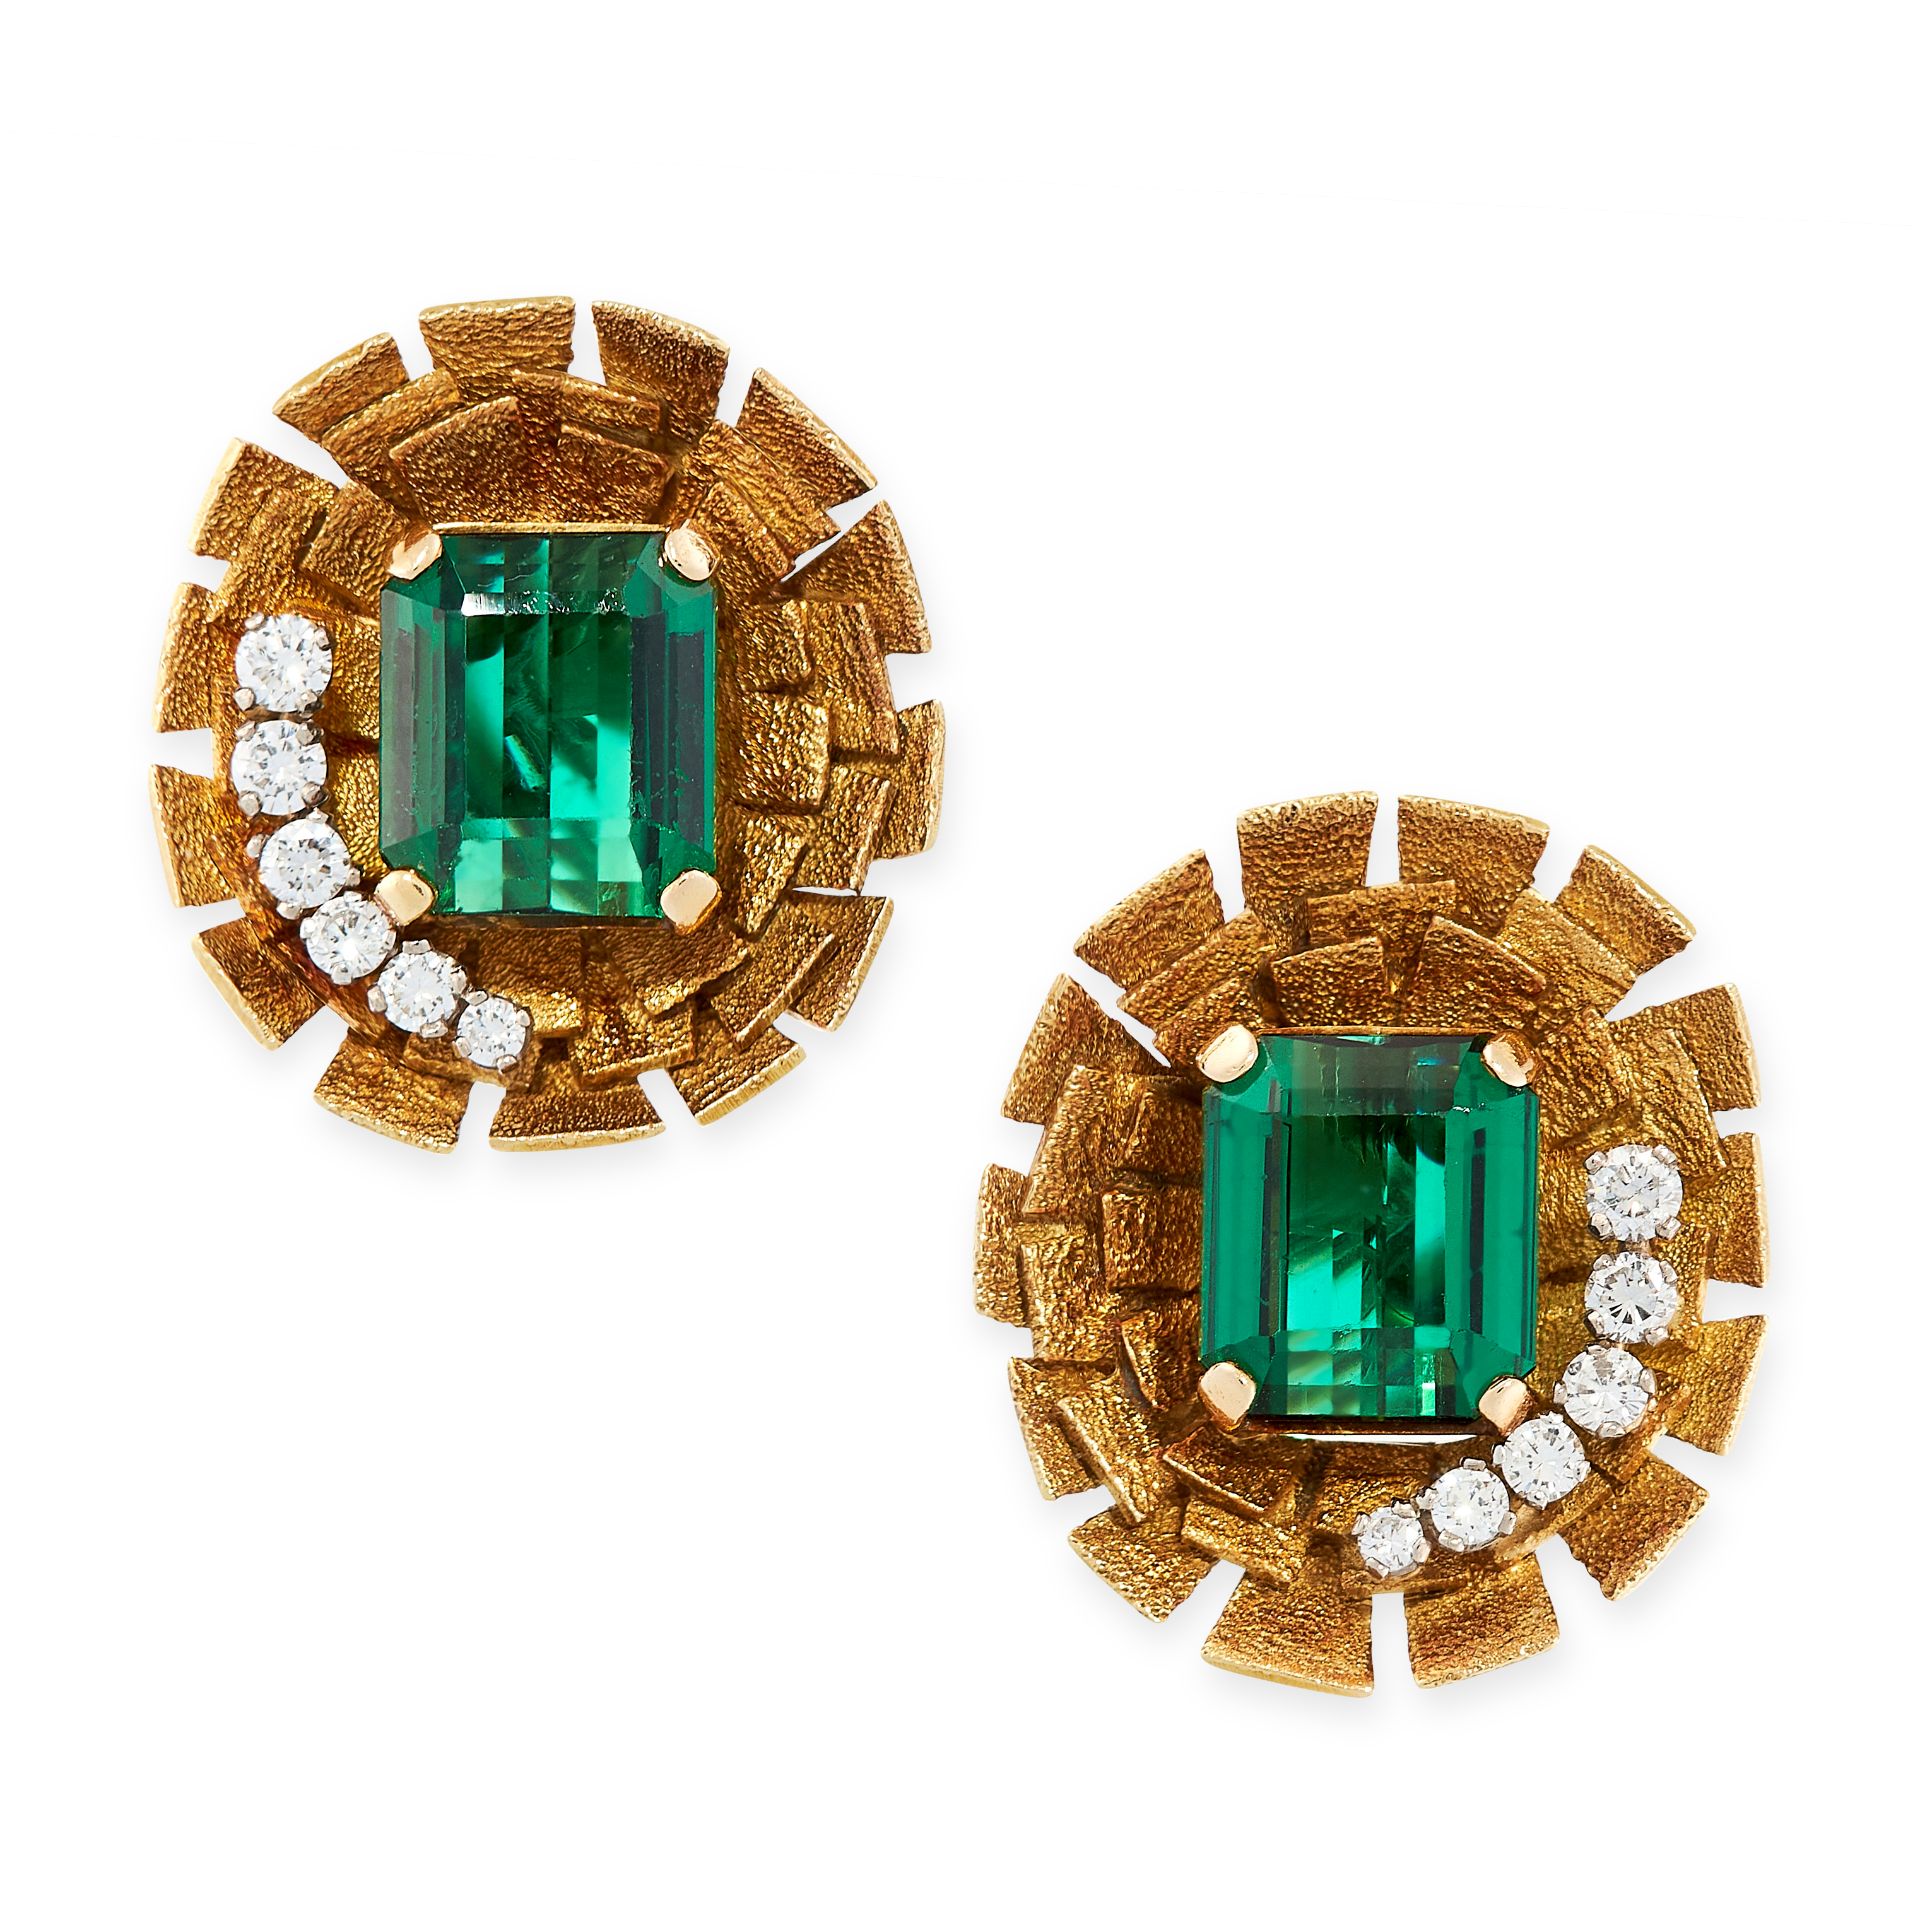 A PAIR OF VINTAGE GREEN TOURMALINE AND DIAMOND CLIP EARRINGS, ANDREW GRIMA 1970s in 18ct yellow